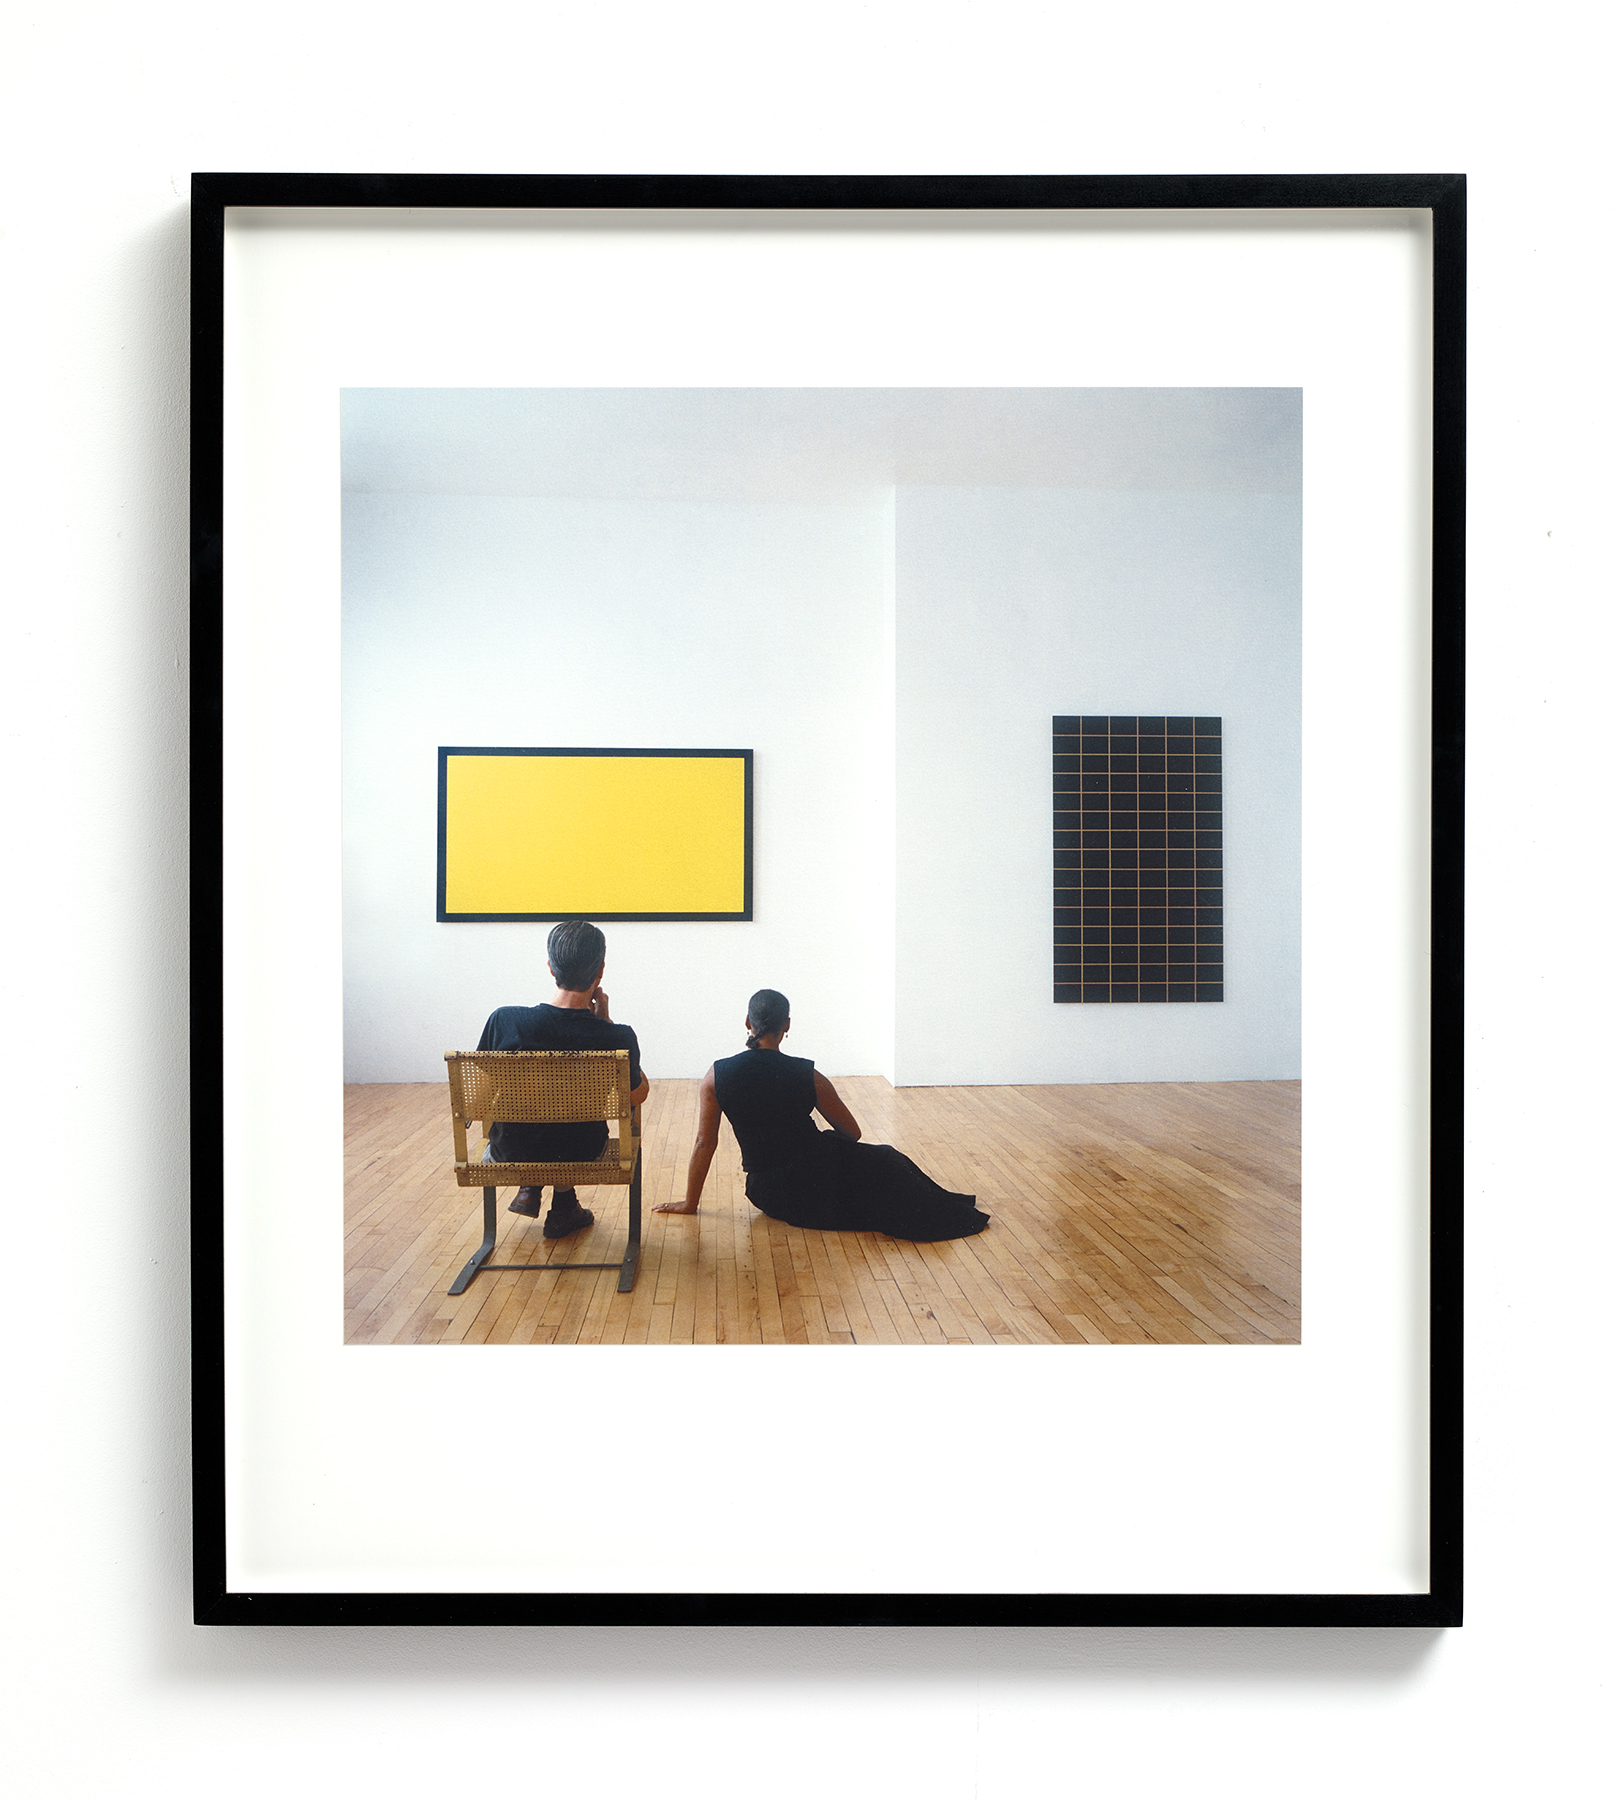 Image of Carrie Mae Weems' work Untitled Yellow Painting, 2003